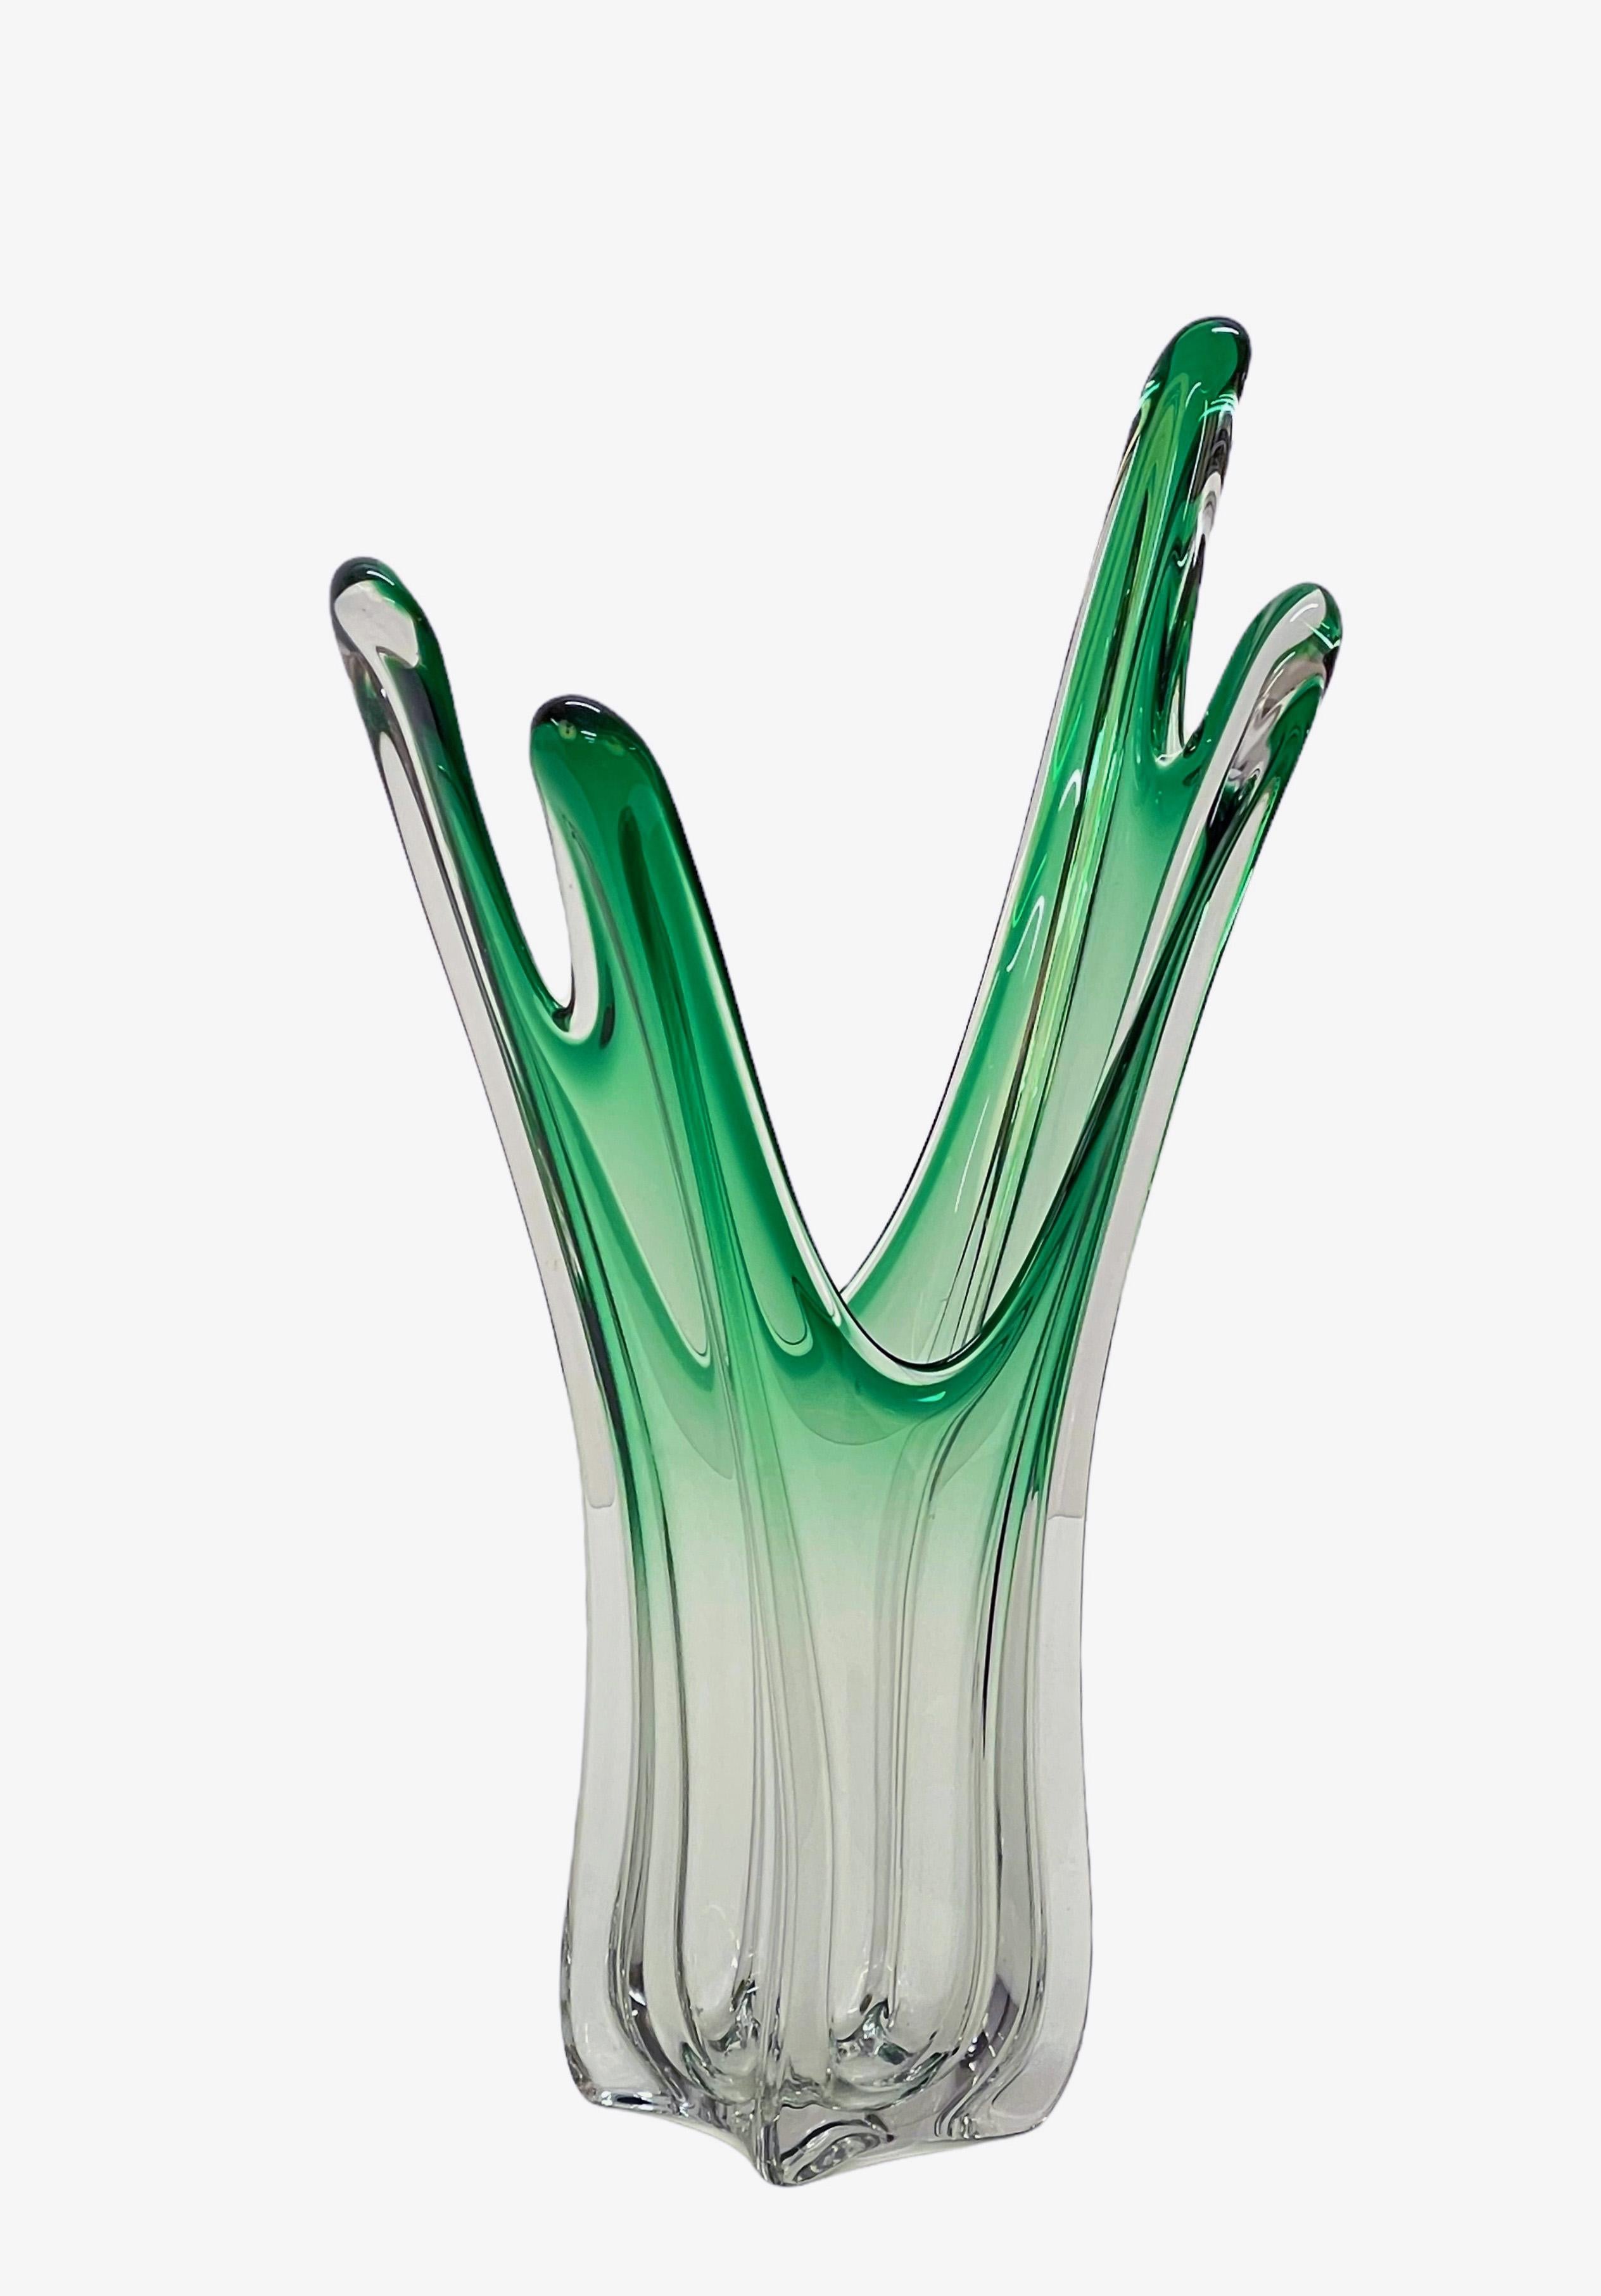 Midcentury Green Art Murano Glass Italian Vase Attributed to F.lli Toso, 1950s For Sale 2